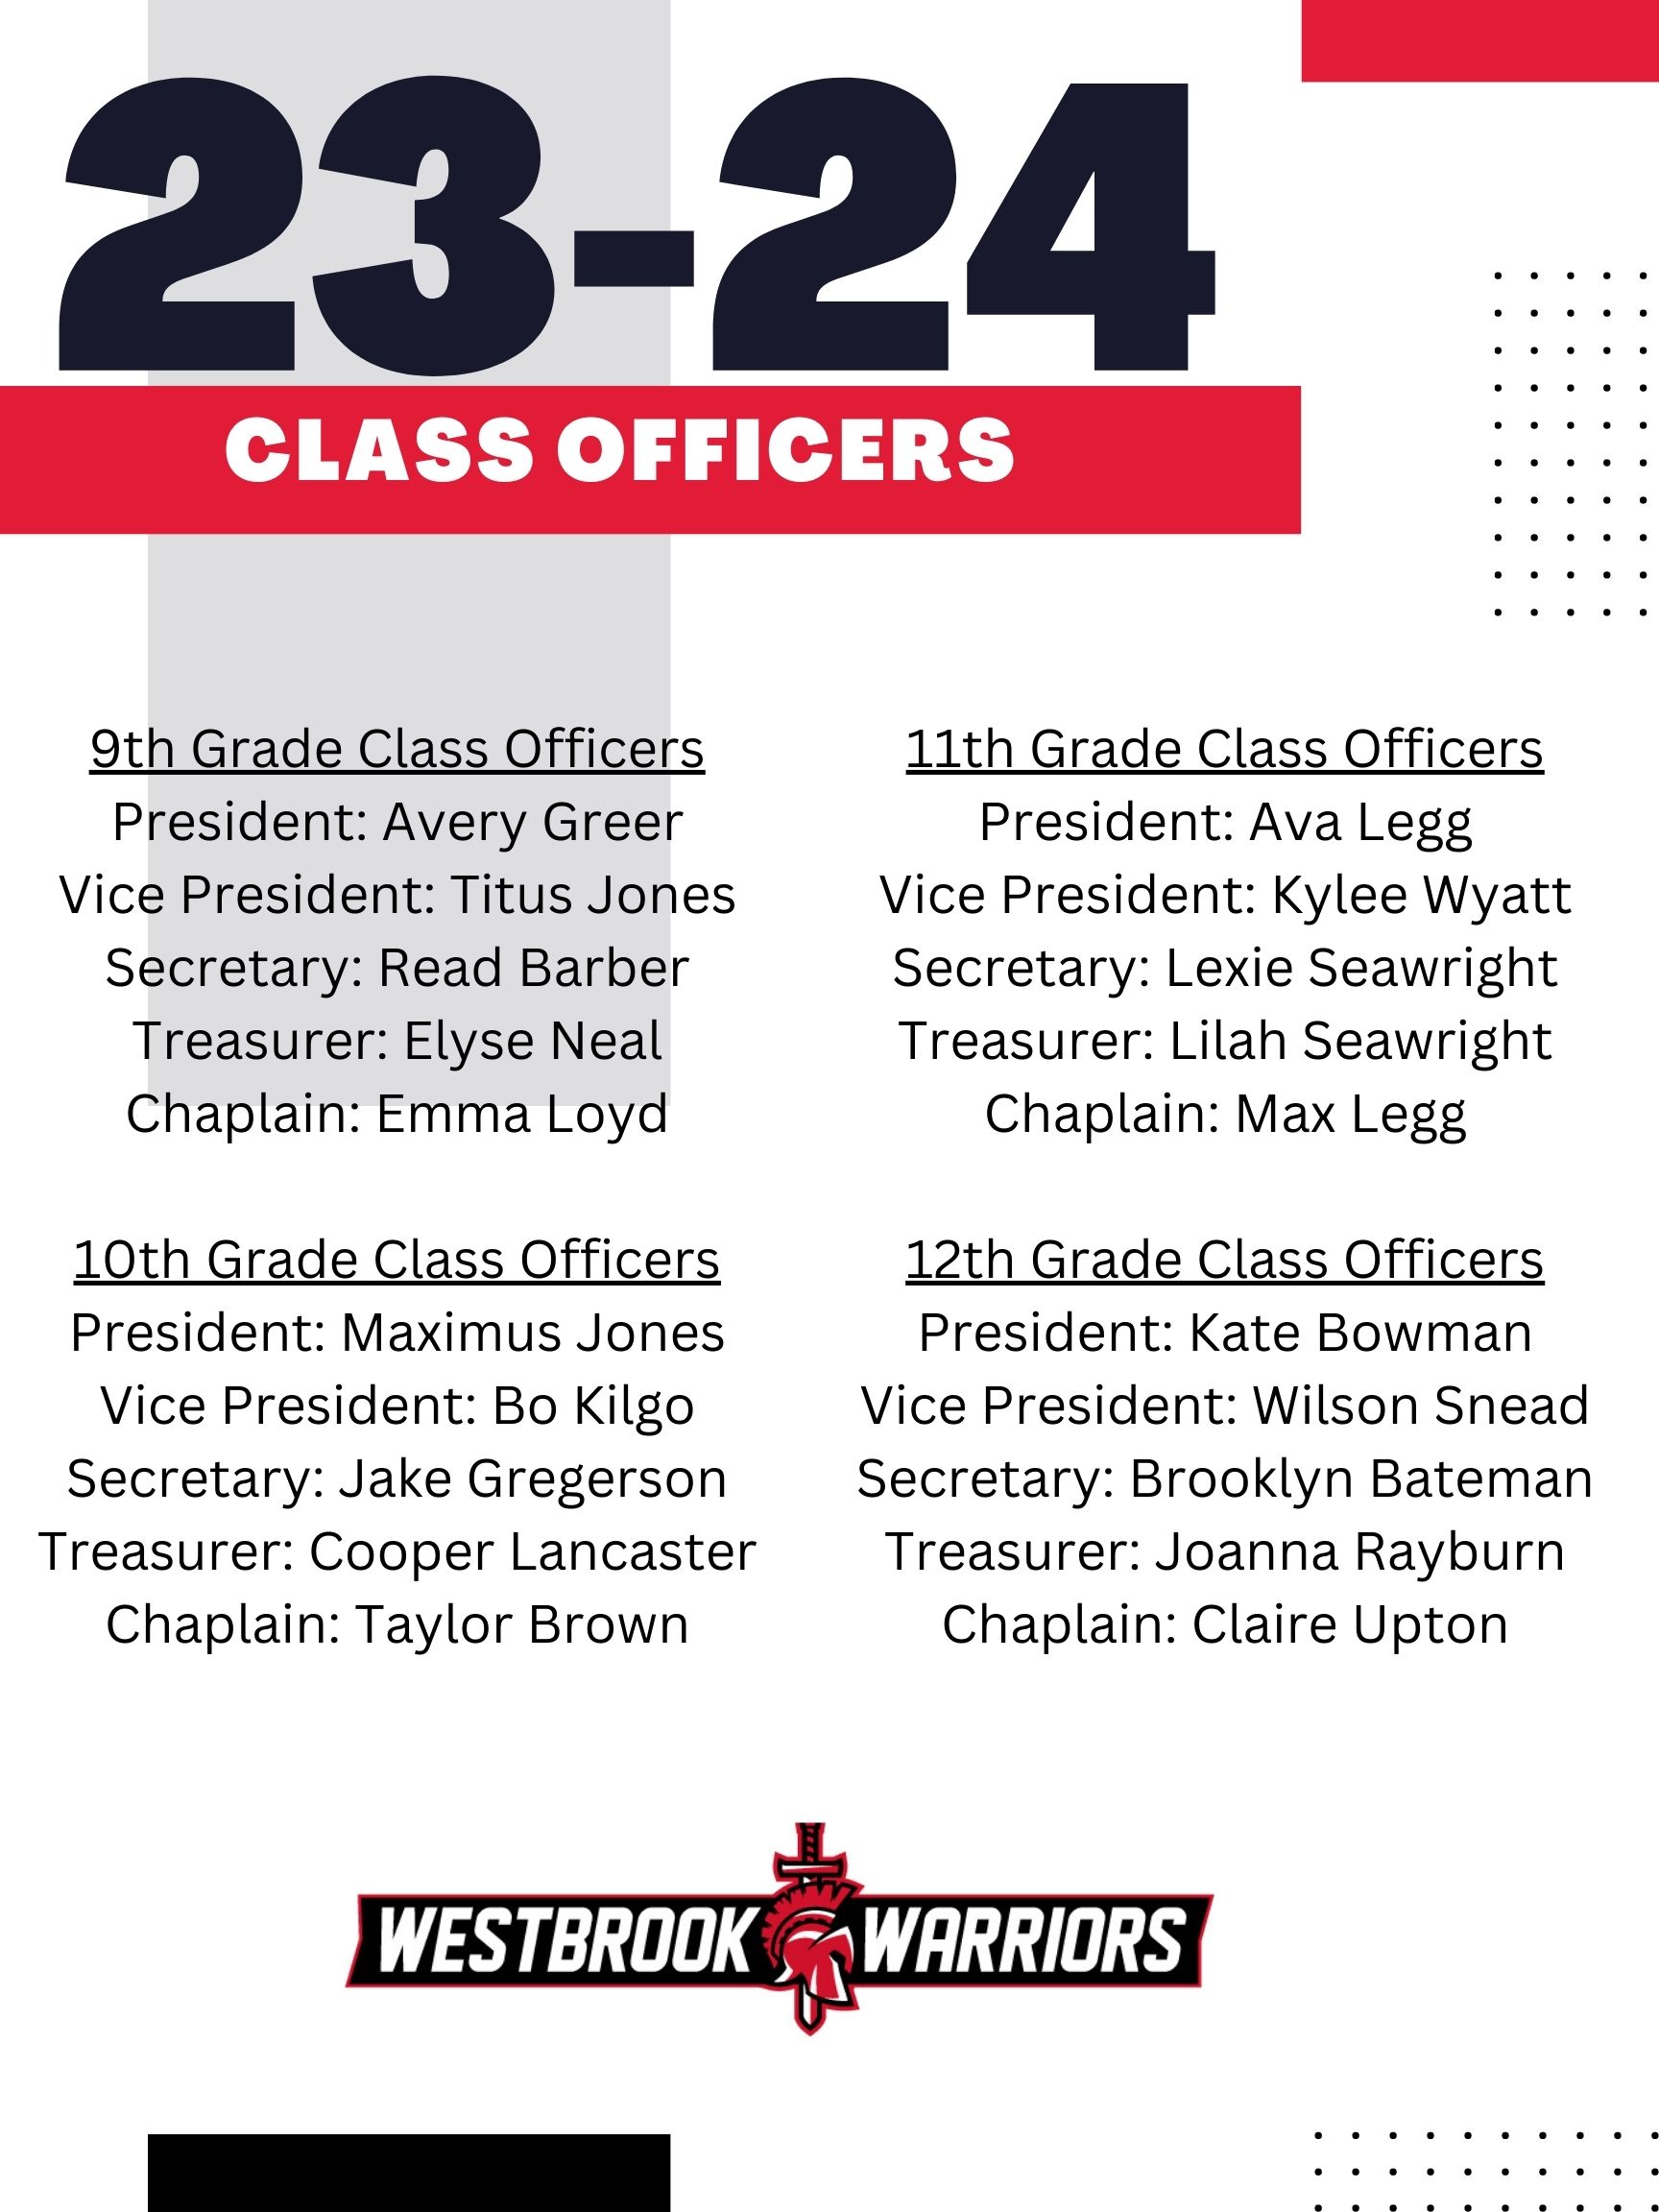 Class officers 23-24